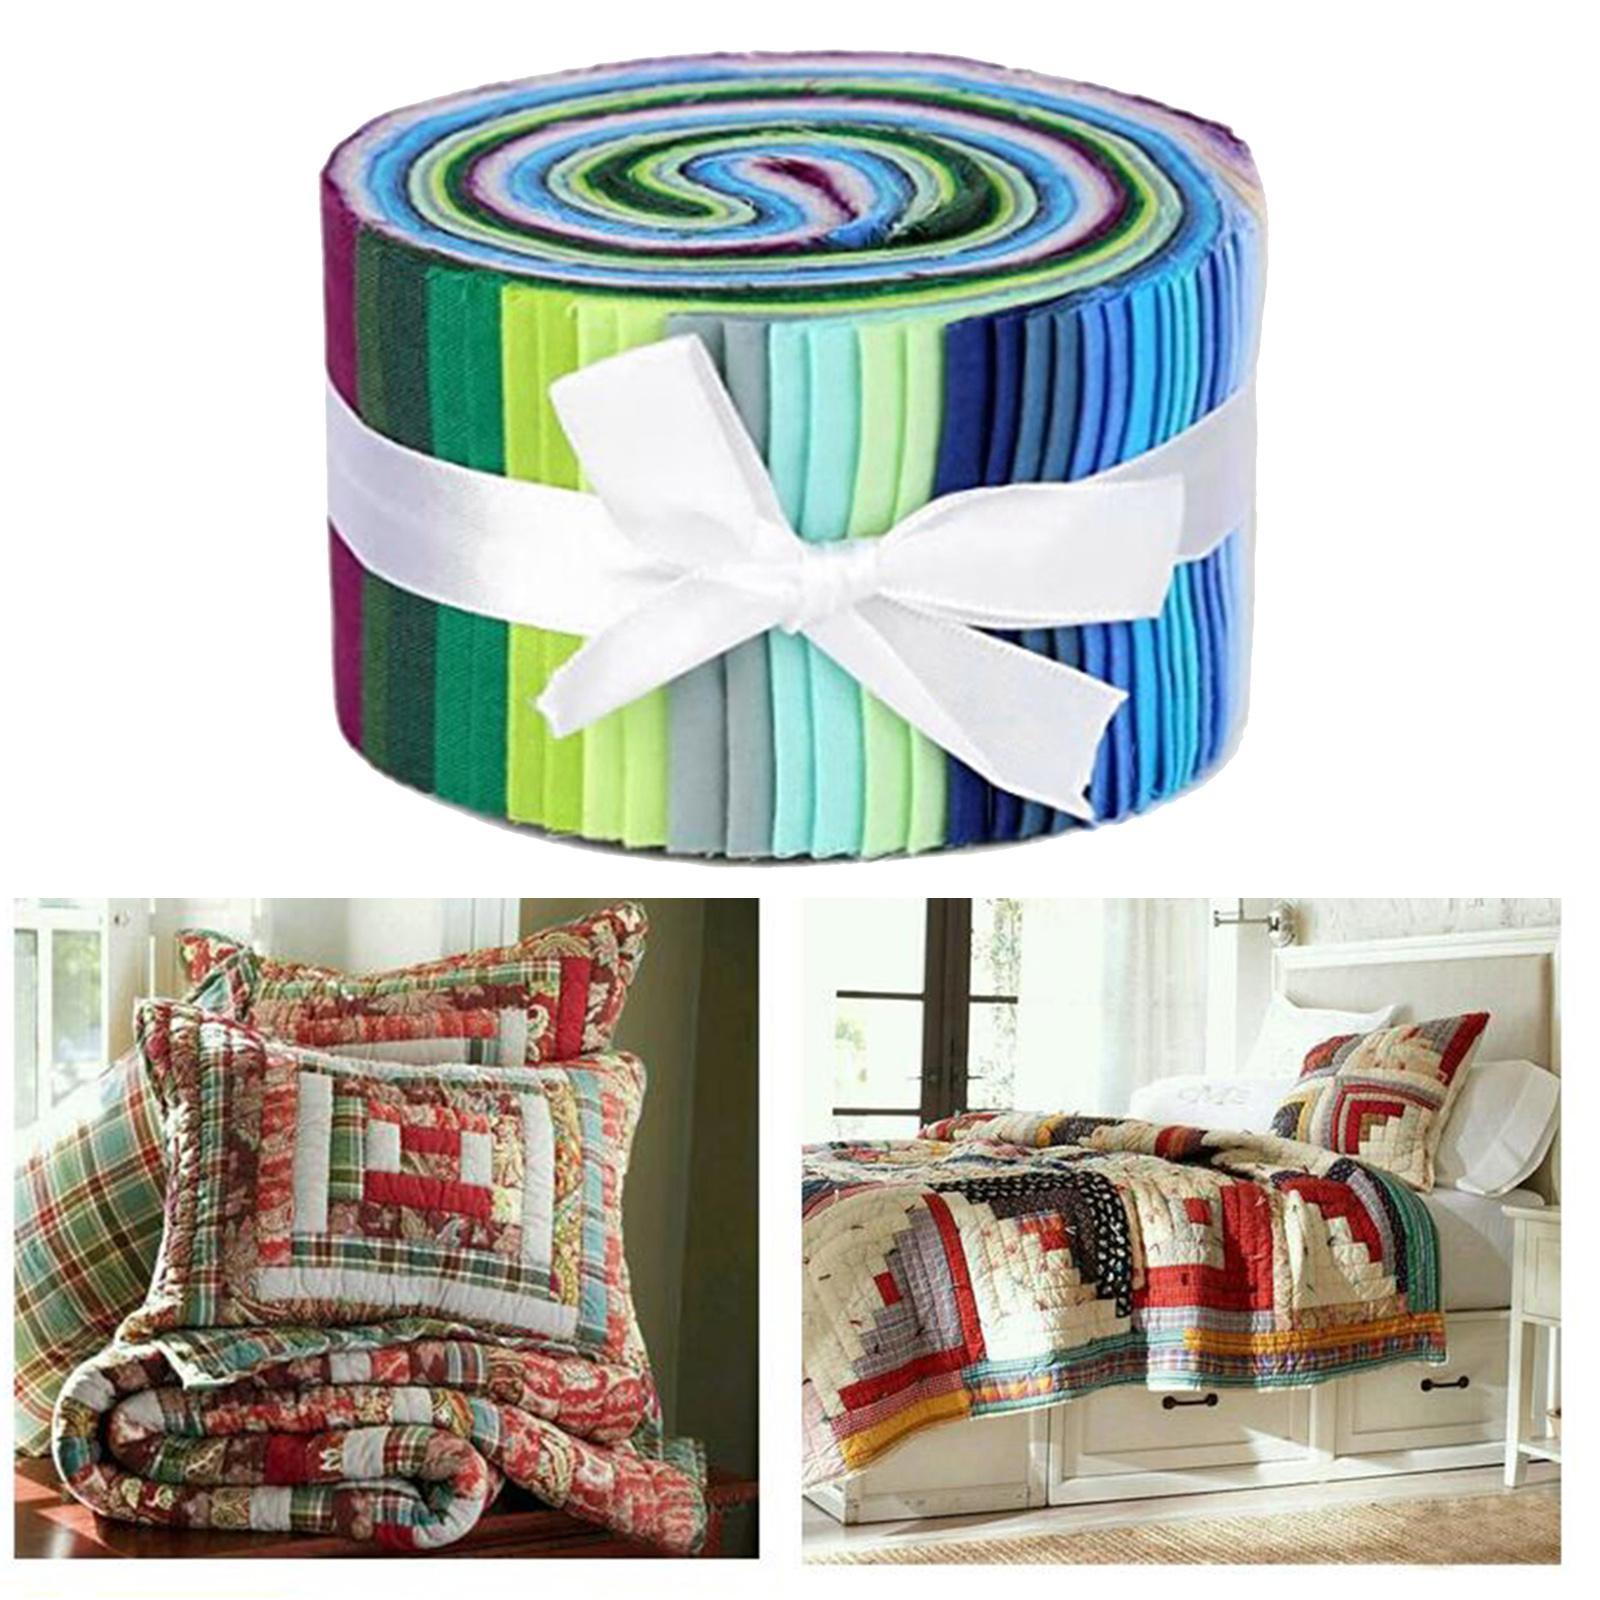 72Pcs Colorful Roll Up Fabric Strips 2.5 Inch Craft Fabric For Patchwork